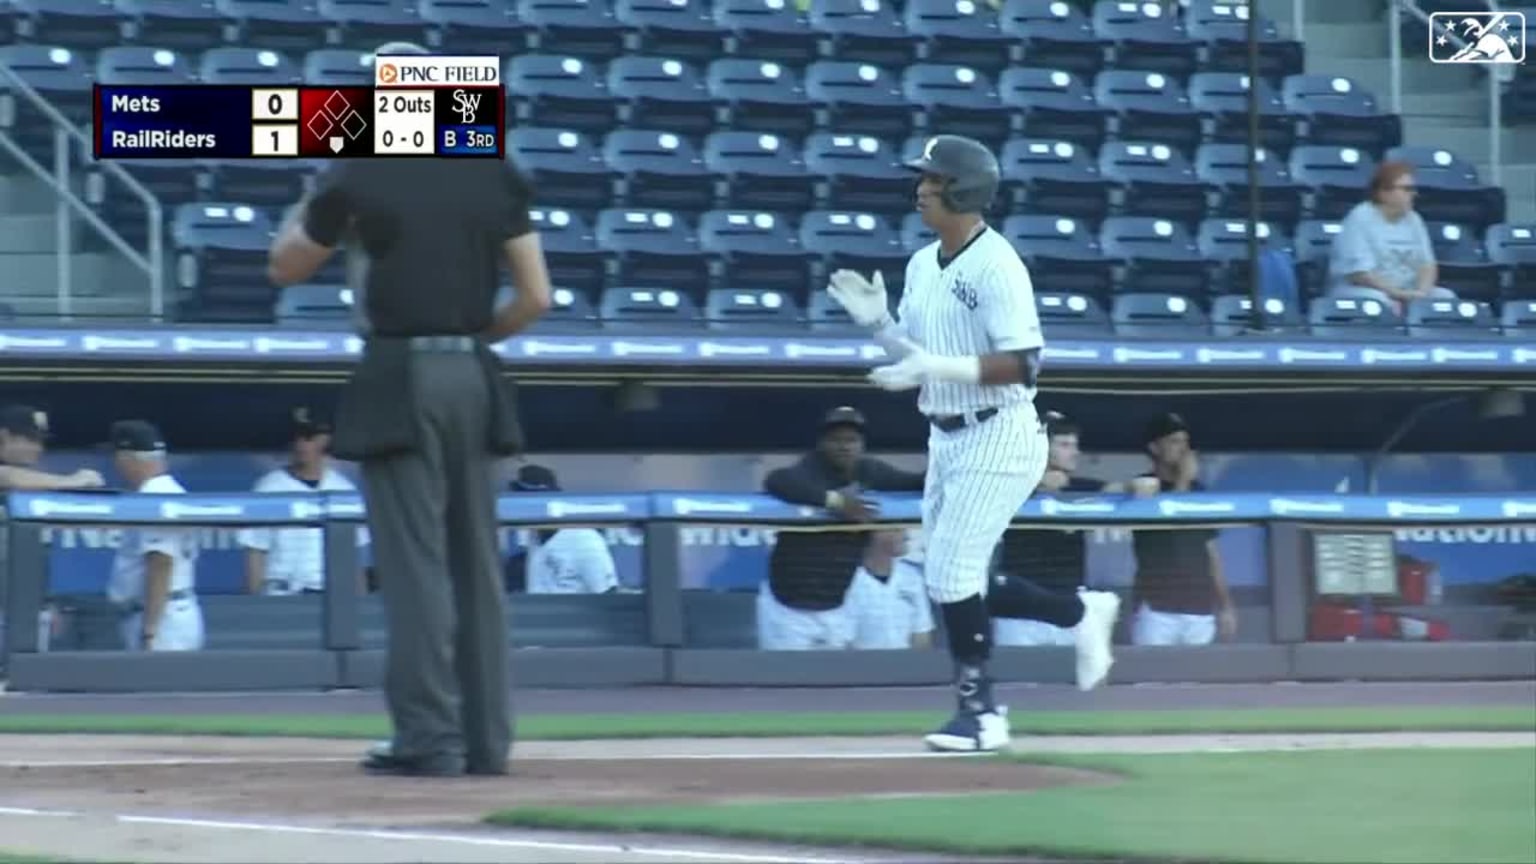 Aaron Judge hits a home run for the RailRiders 